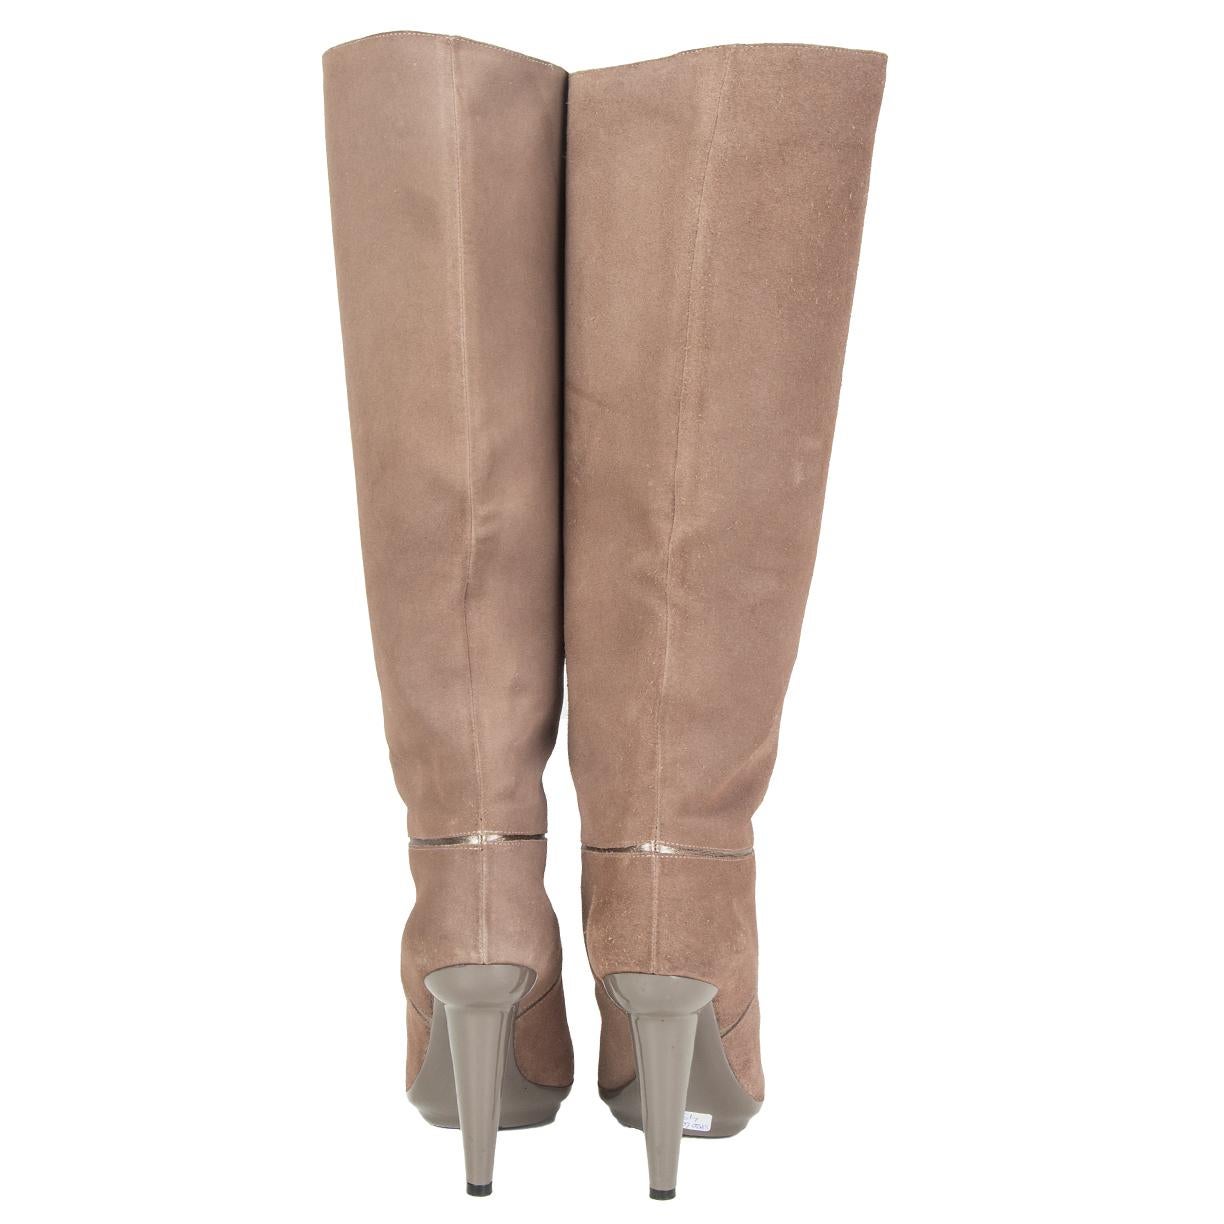 BOTTEGA VENETA taupe suede & METALLIC Knee High Platform Boots Shoes 37 In Excellent Condition For Sale In Zürich, CH